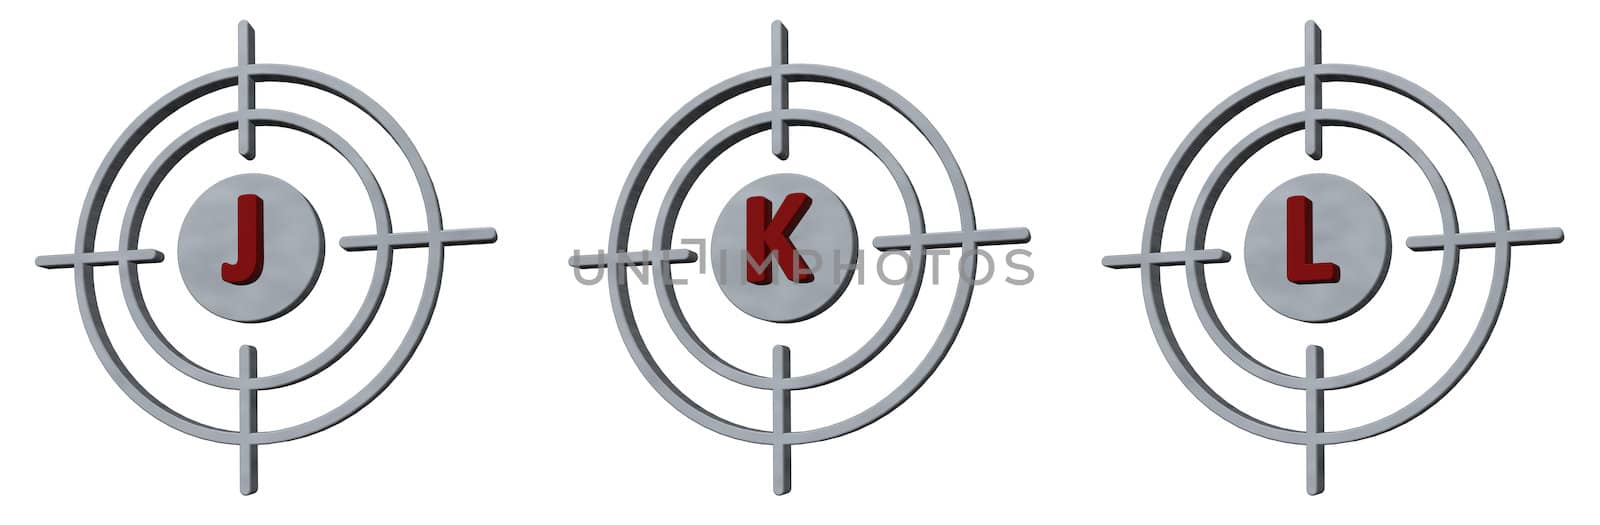 gun sights with the letters jkl on white background - 3d illustration